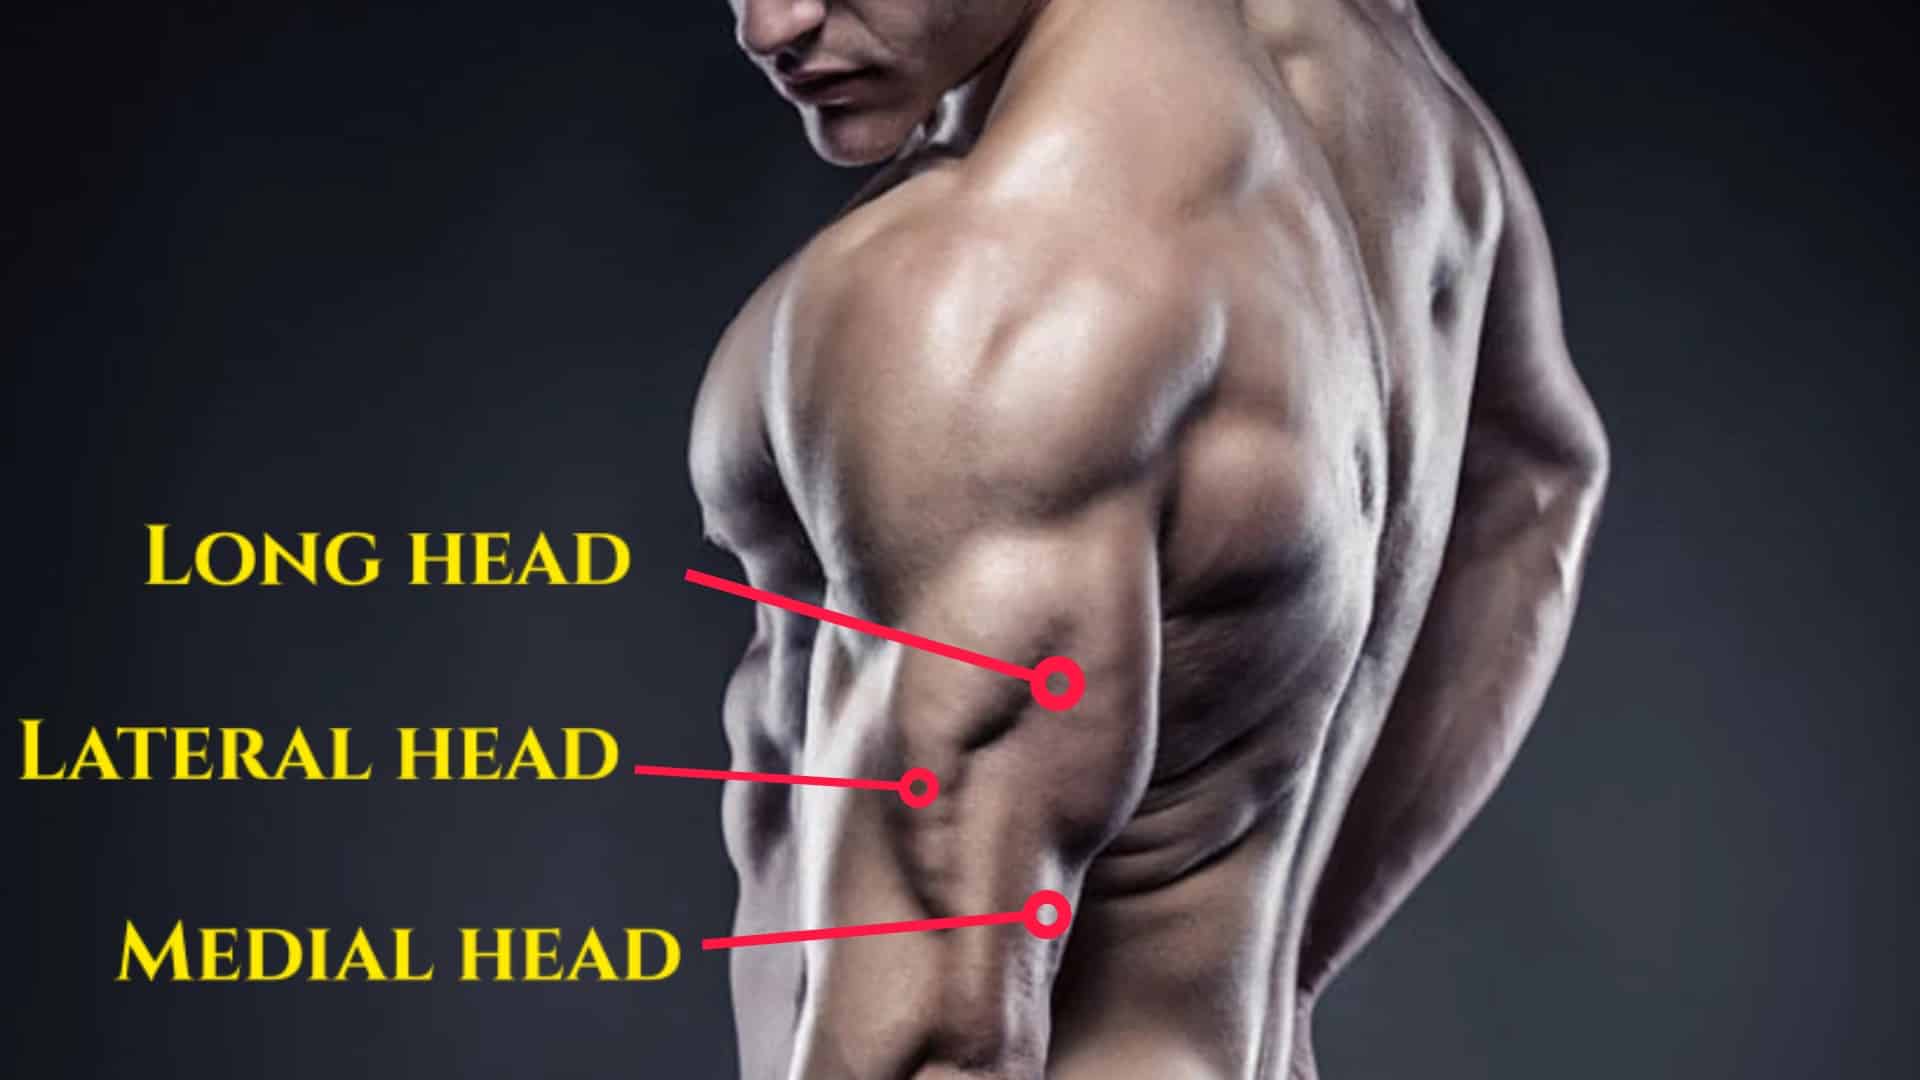 Medial head triceps exercises for Bigger, Stronger Arms